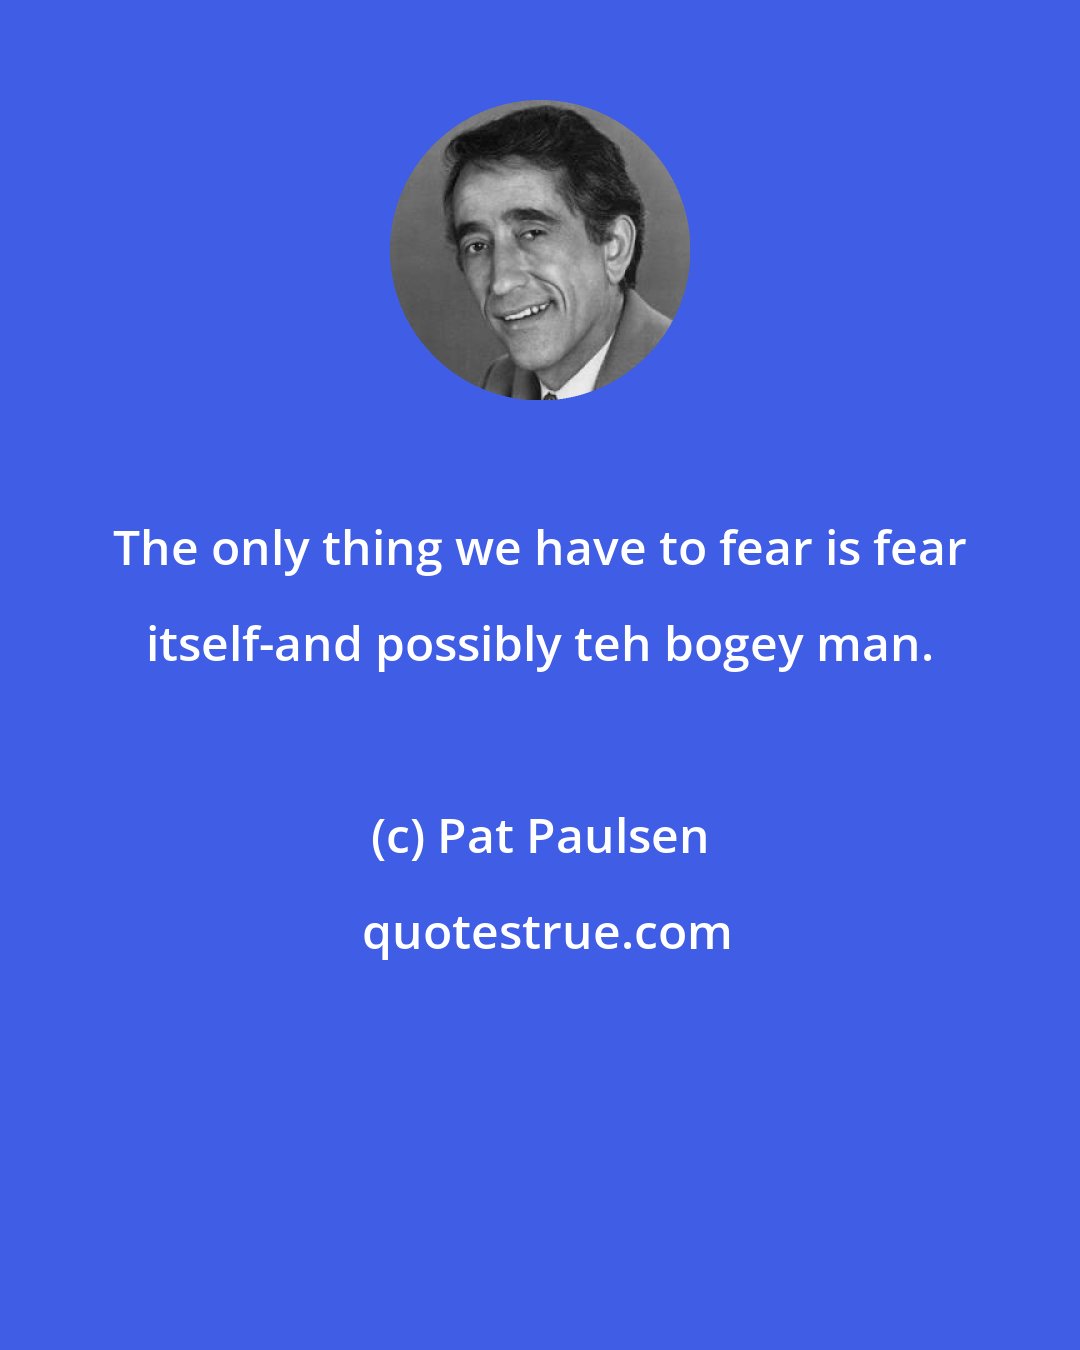 Pat Paulsen: The only thing we have to fear is fear itself-and possibly teh bogey man.